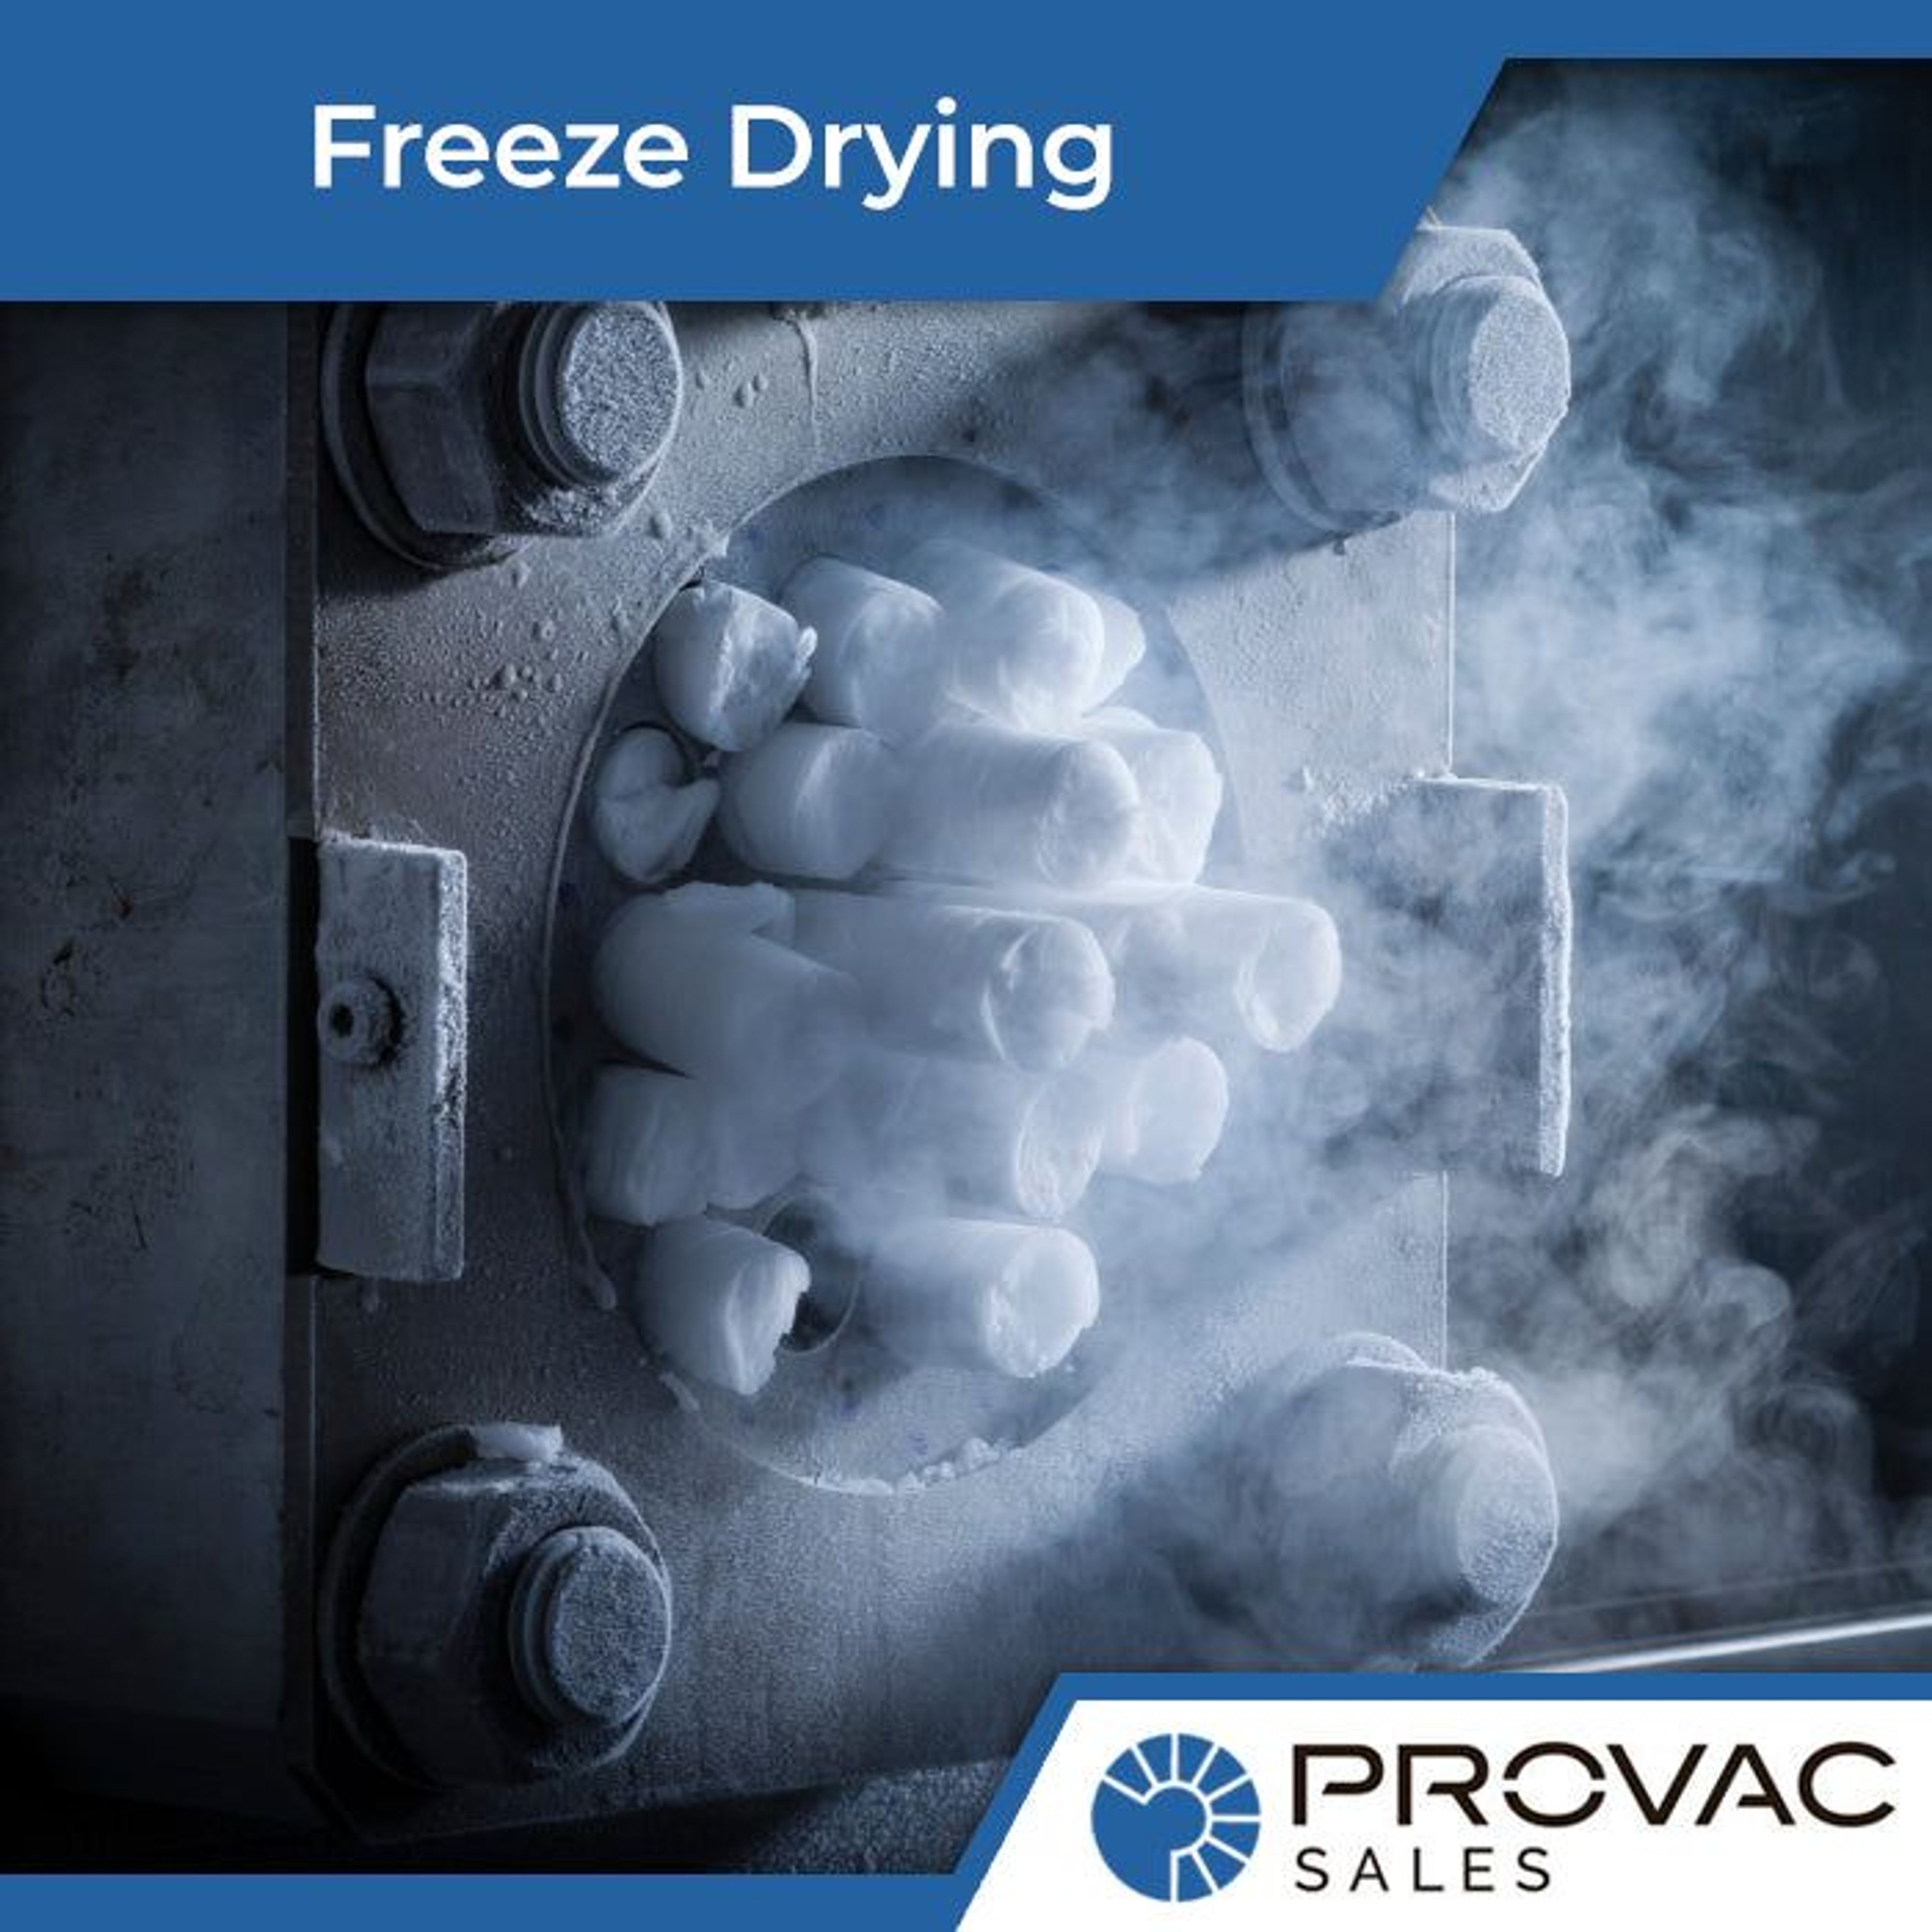 Preserve food with dry ice - ICE TECH BLOG